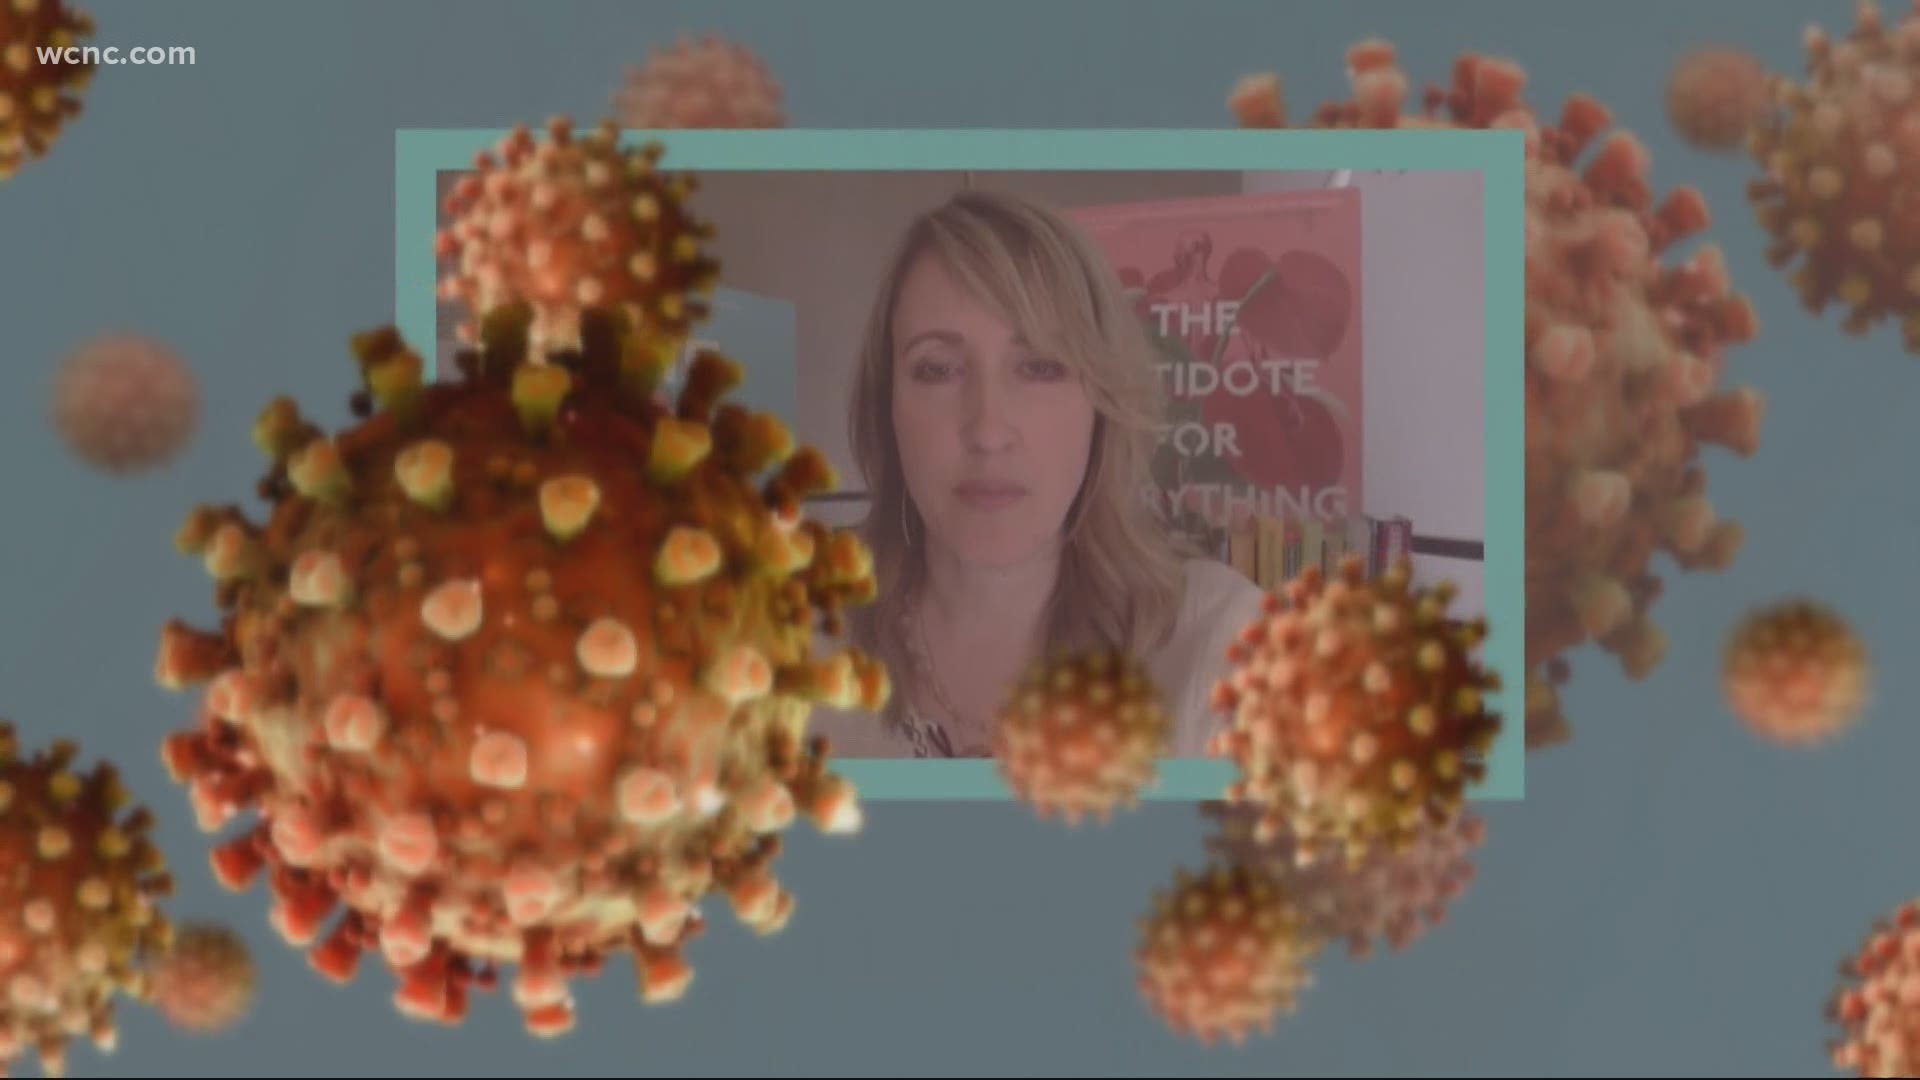 The Charlotte doctor is warning others after her 14-year-old daughter gave her the coronavirus.